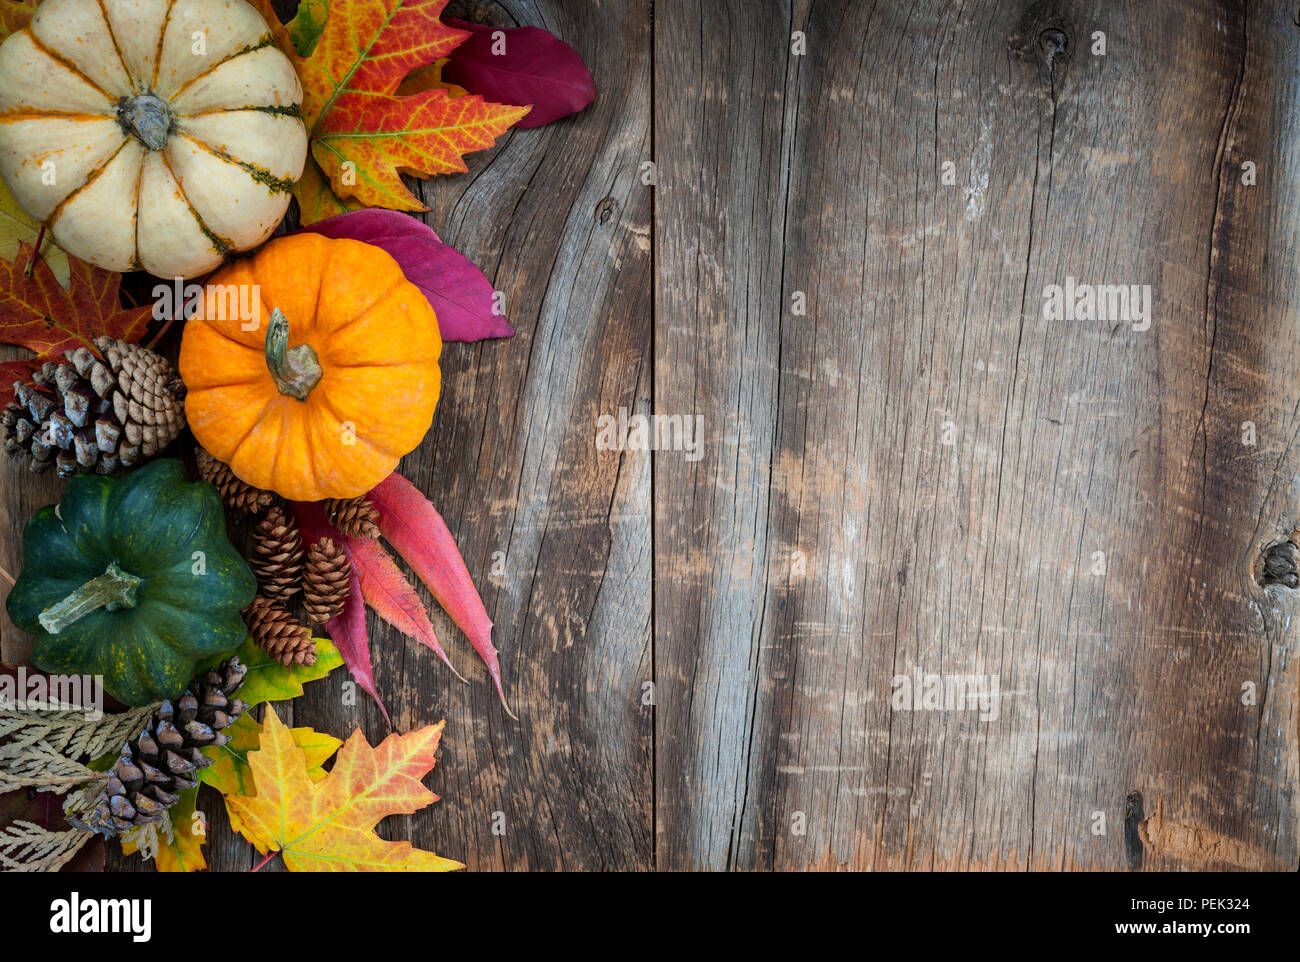 Fall background of autumn pumpkins and leaves decoration on rustic wood with copy space Stock Photo